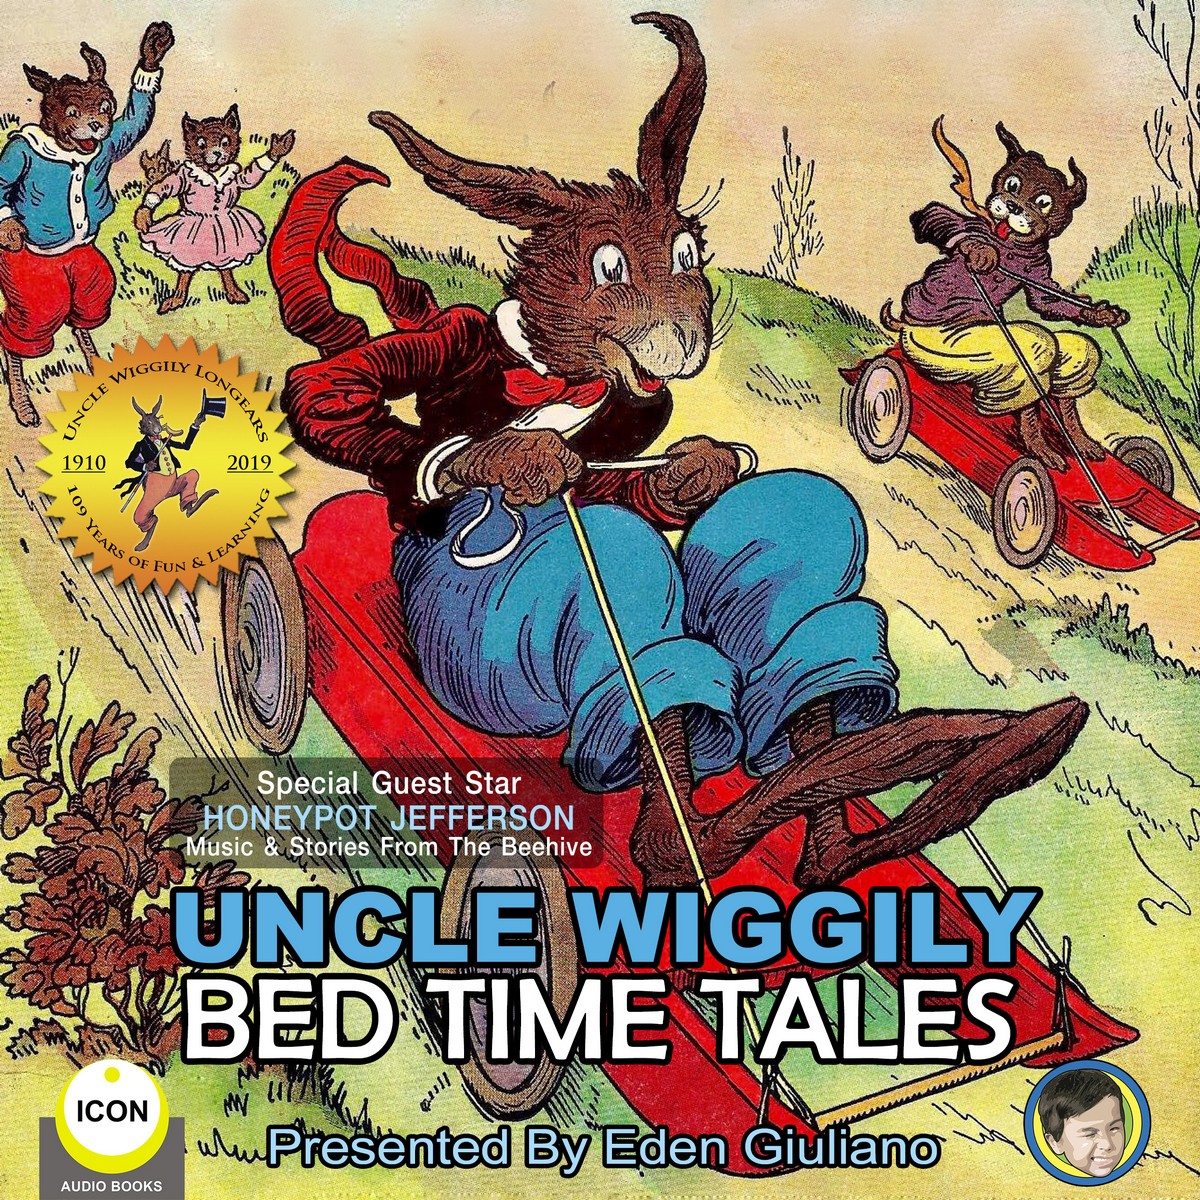 Uncle Wiggily Bed Time Tales